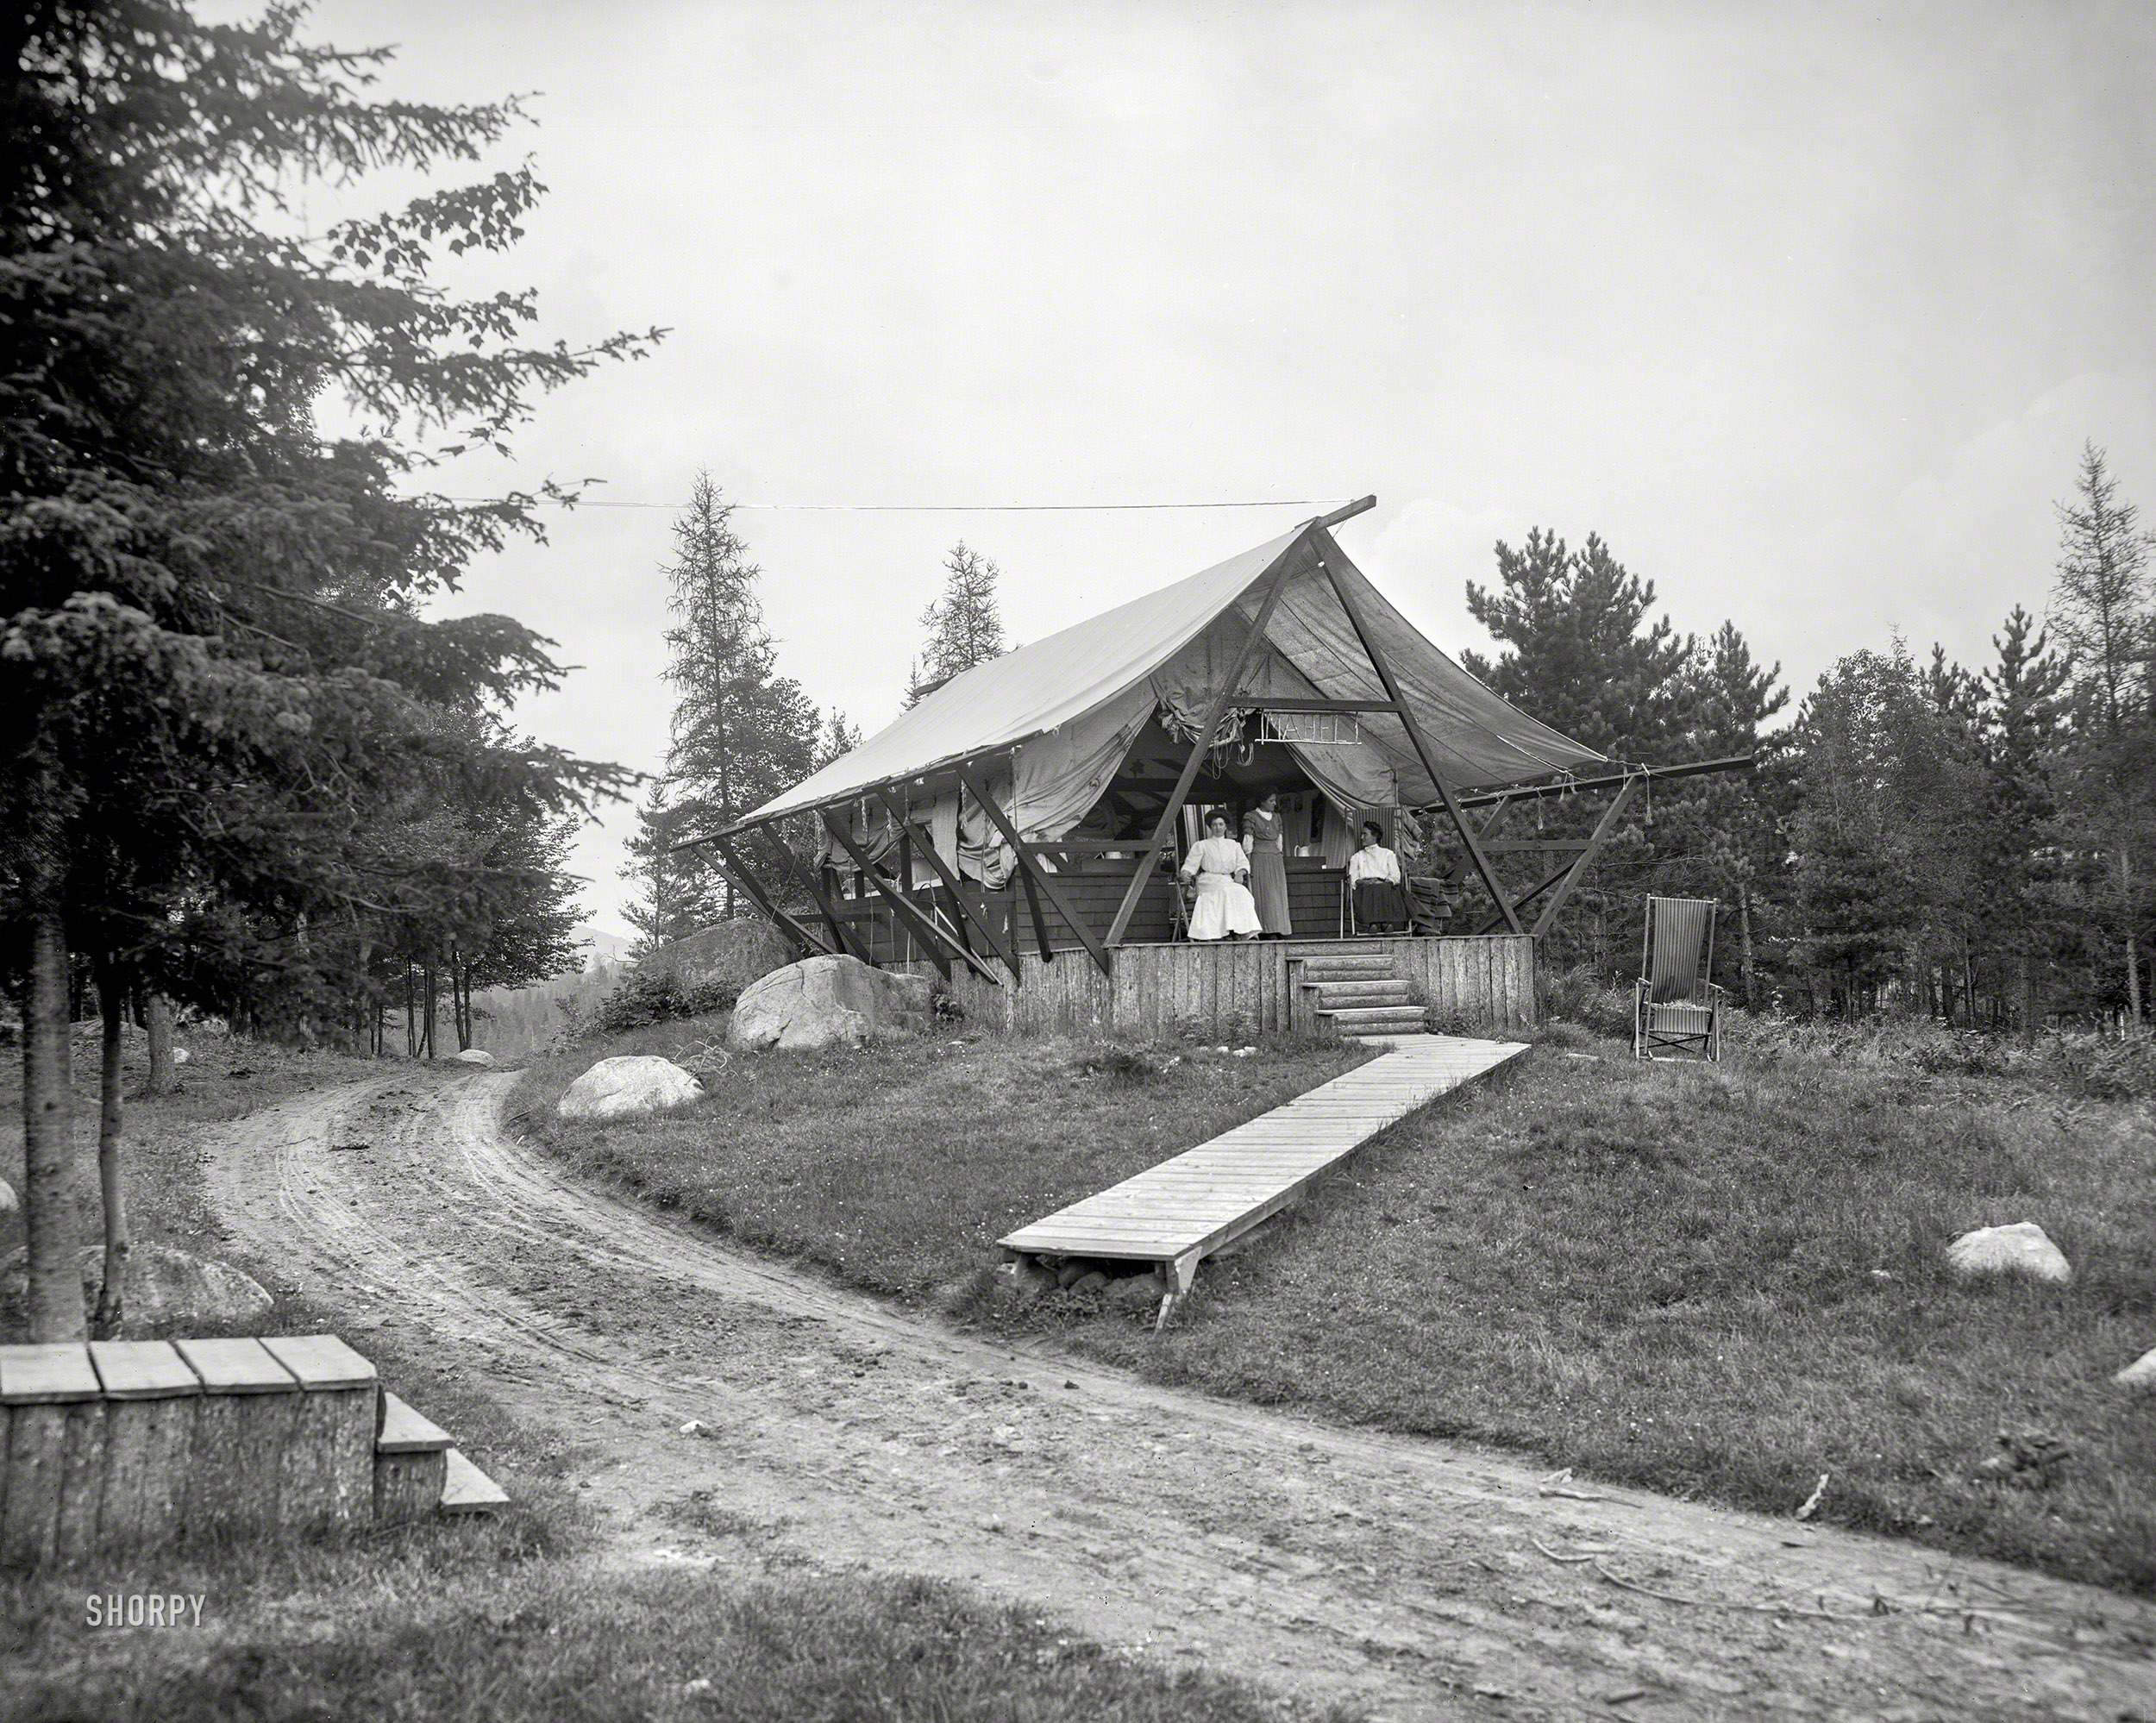 1909. "A typical house tent, Ray Brook sanatorium, Adirondack Mountains." Taking the "fresh air" cure on the grounds of the New York State Hospital for Incipient Pulmonary Tuberculosis. 8x10 inch glass negative. View full size.